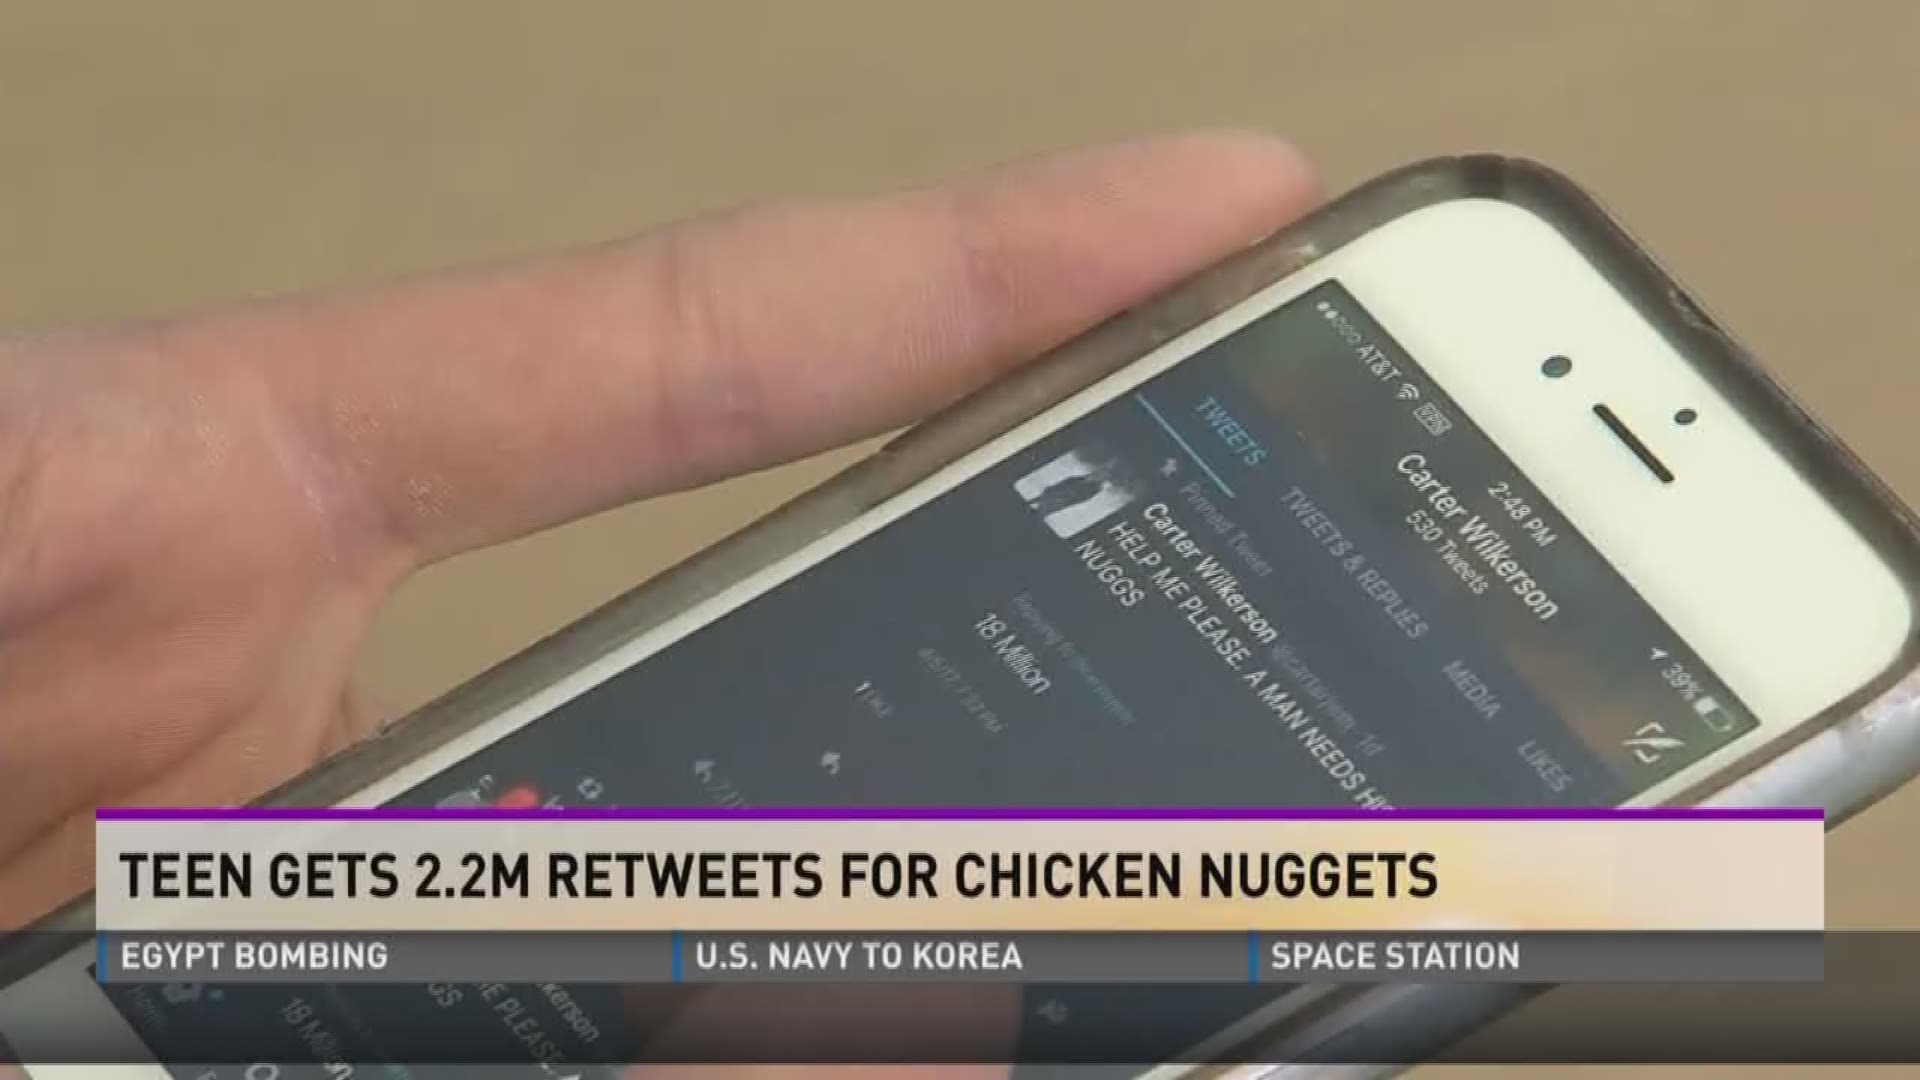 A Reno teen is reaching peak Twitter fame today after accepting a challenge from Wendy's official fast food Twitter account to get 18 million retweets in exchange for a year's supply of chicken nuggets.